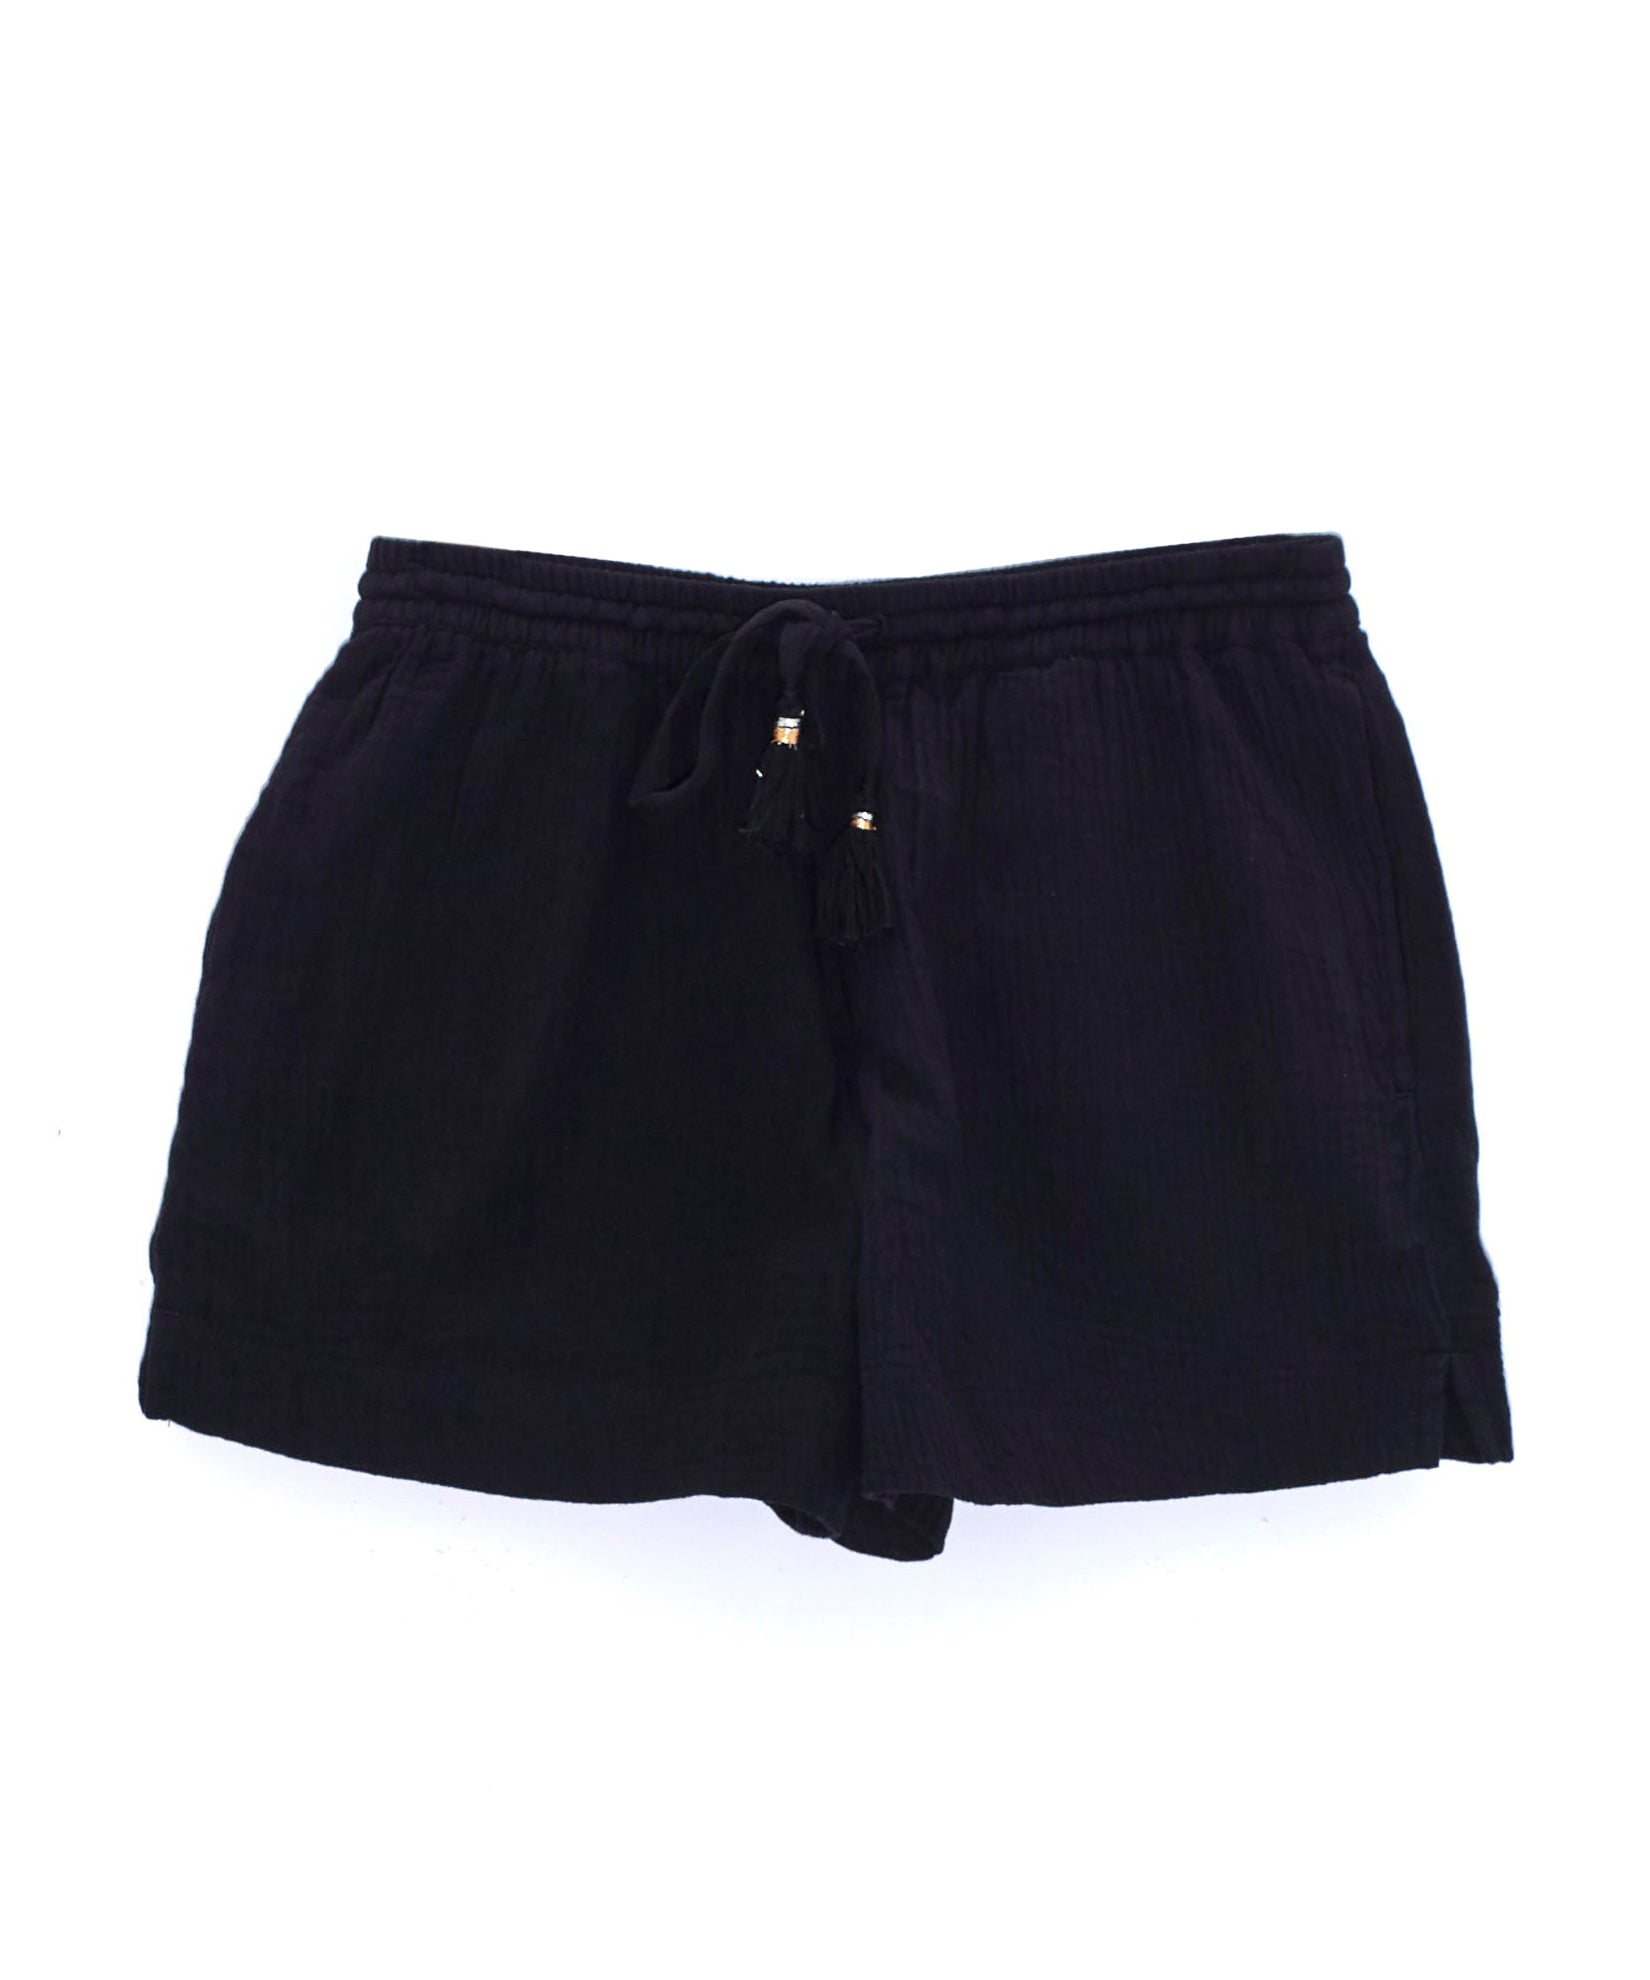 Double Gauze Beach Shorts in color Black